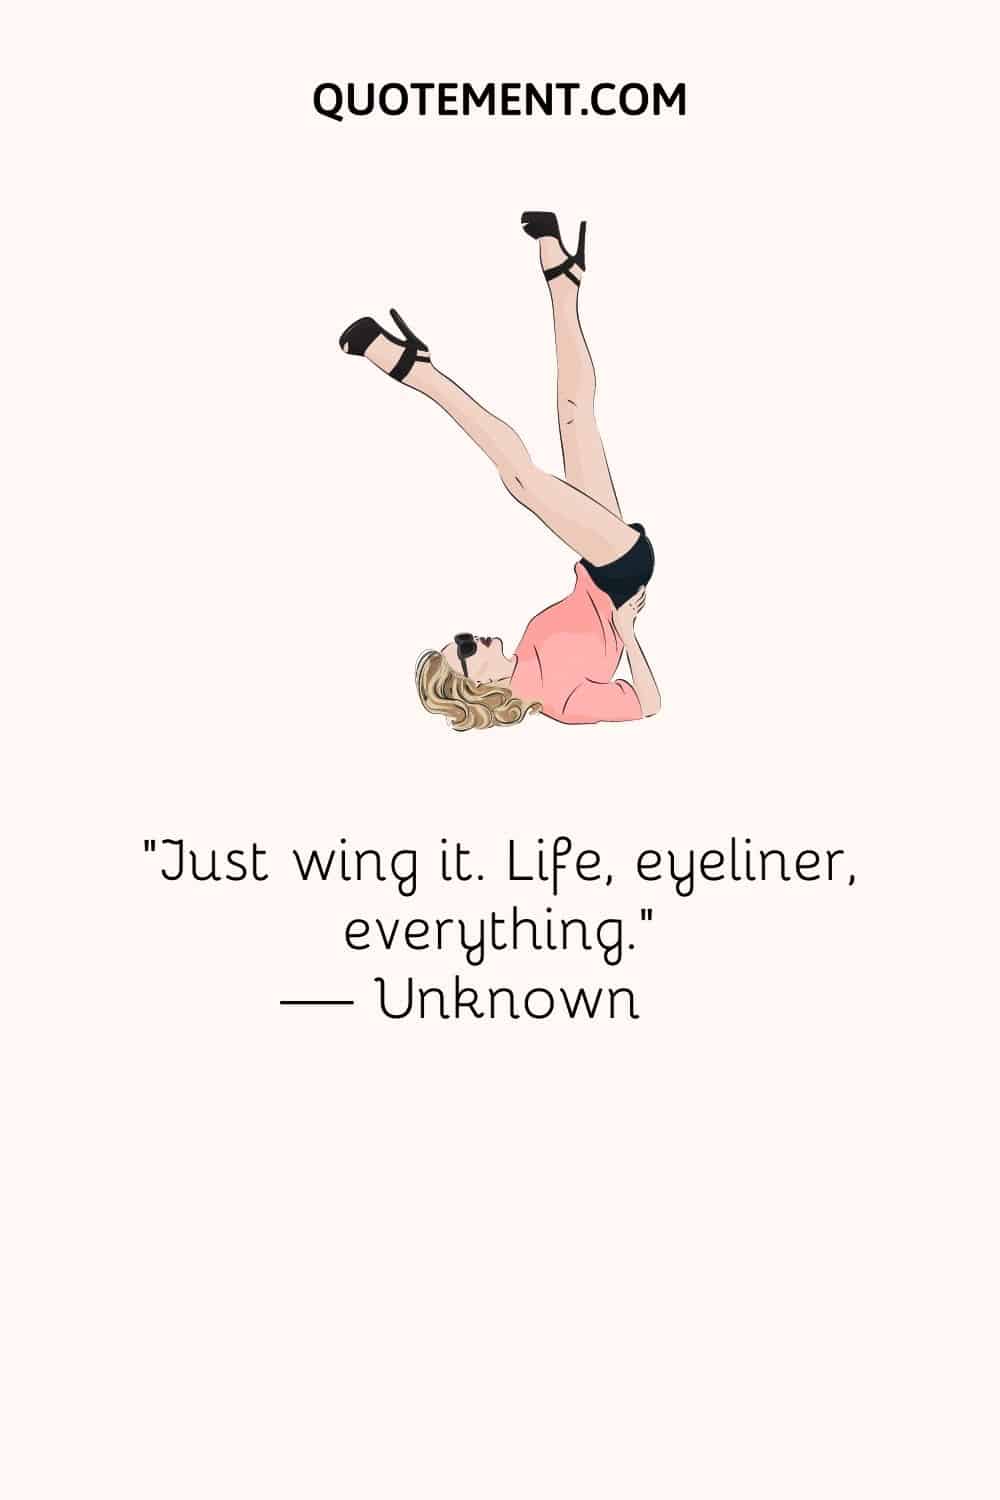 “Just wing it. Life, eyeliner, everything.” — Unknown